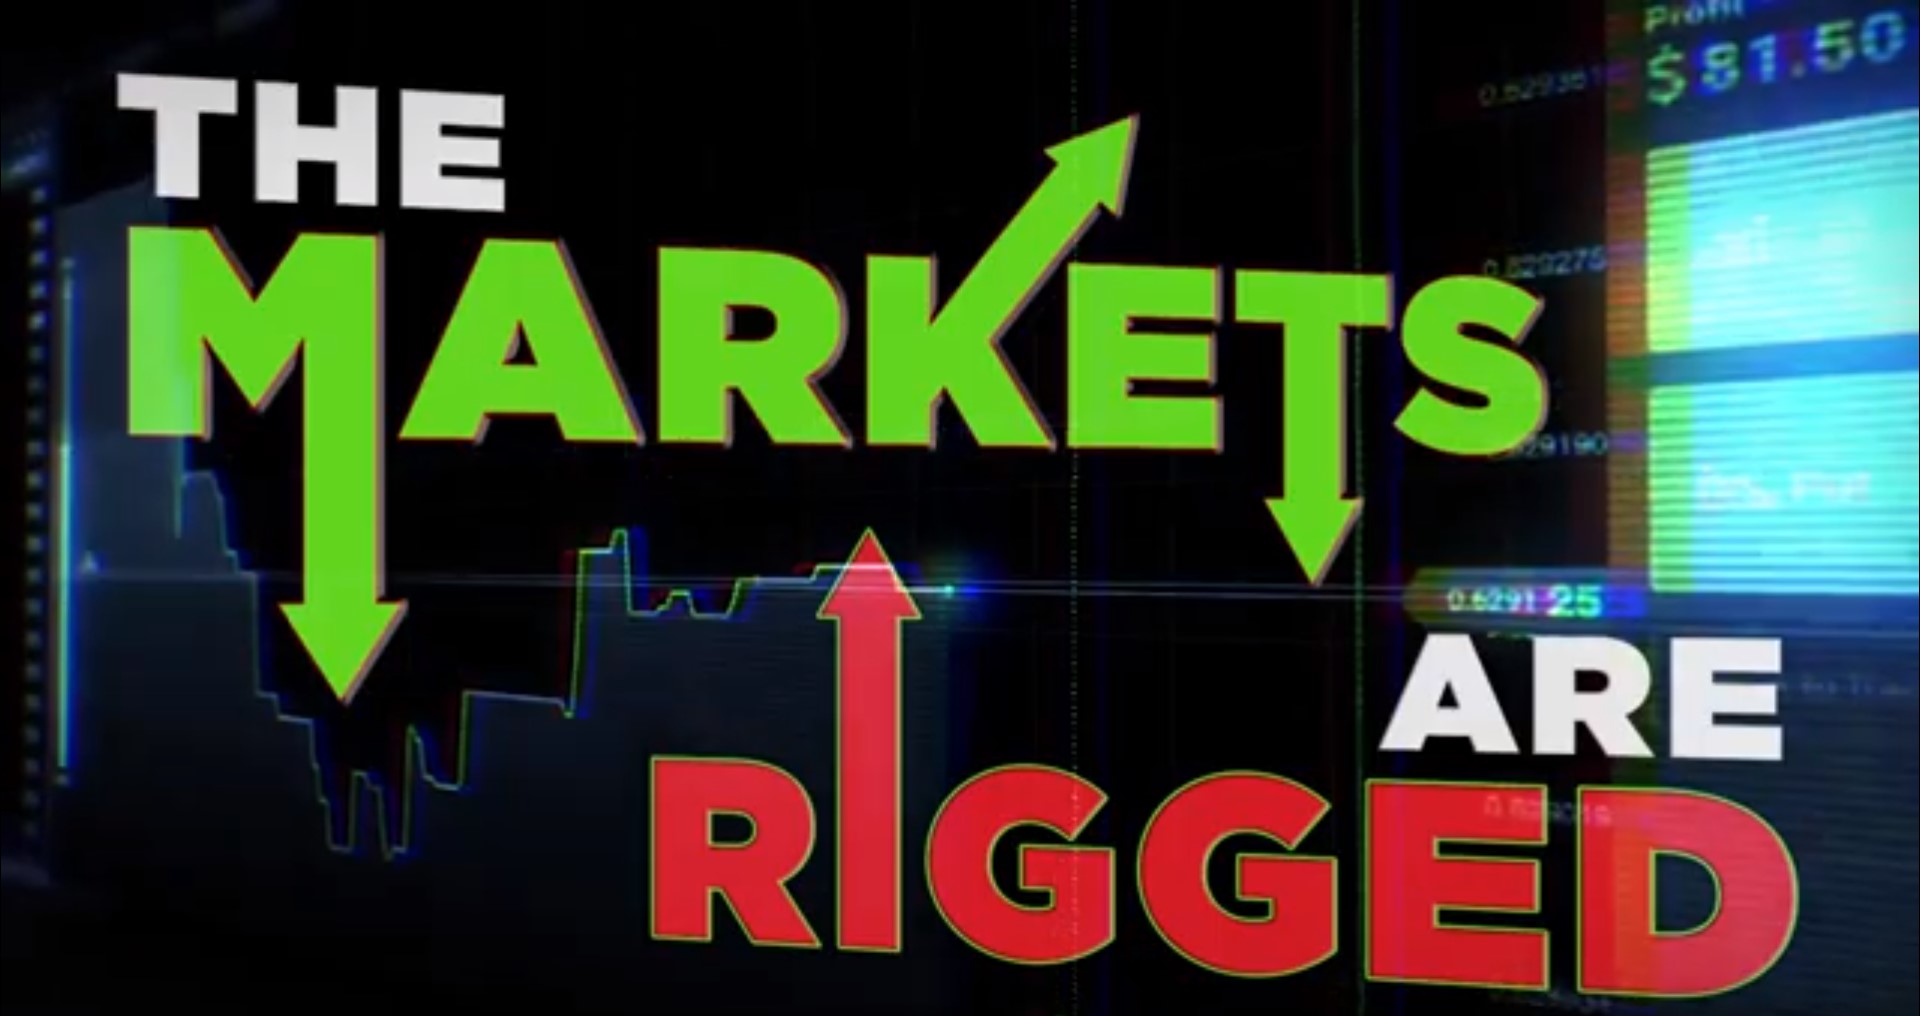 WATCH: The Markets are Rigged